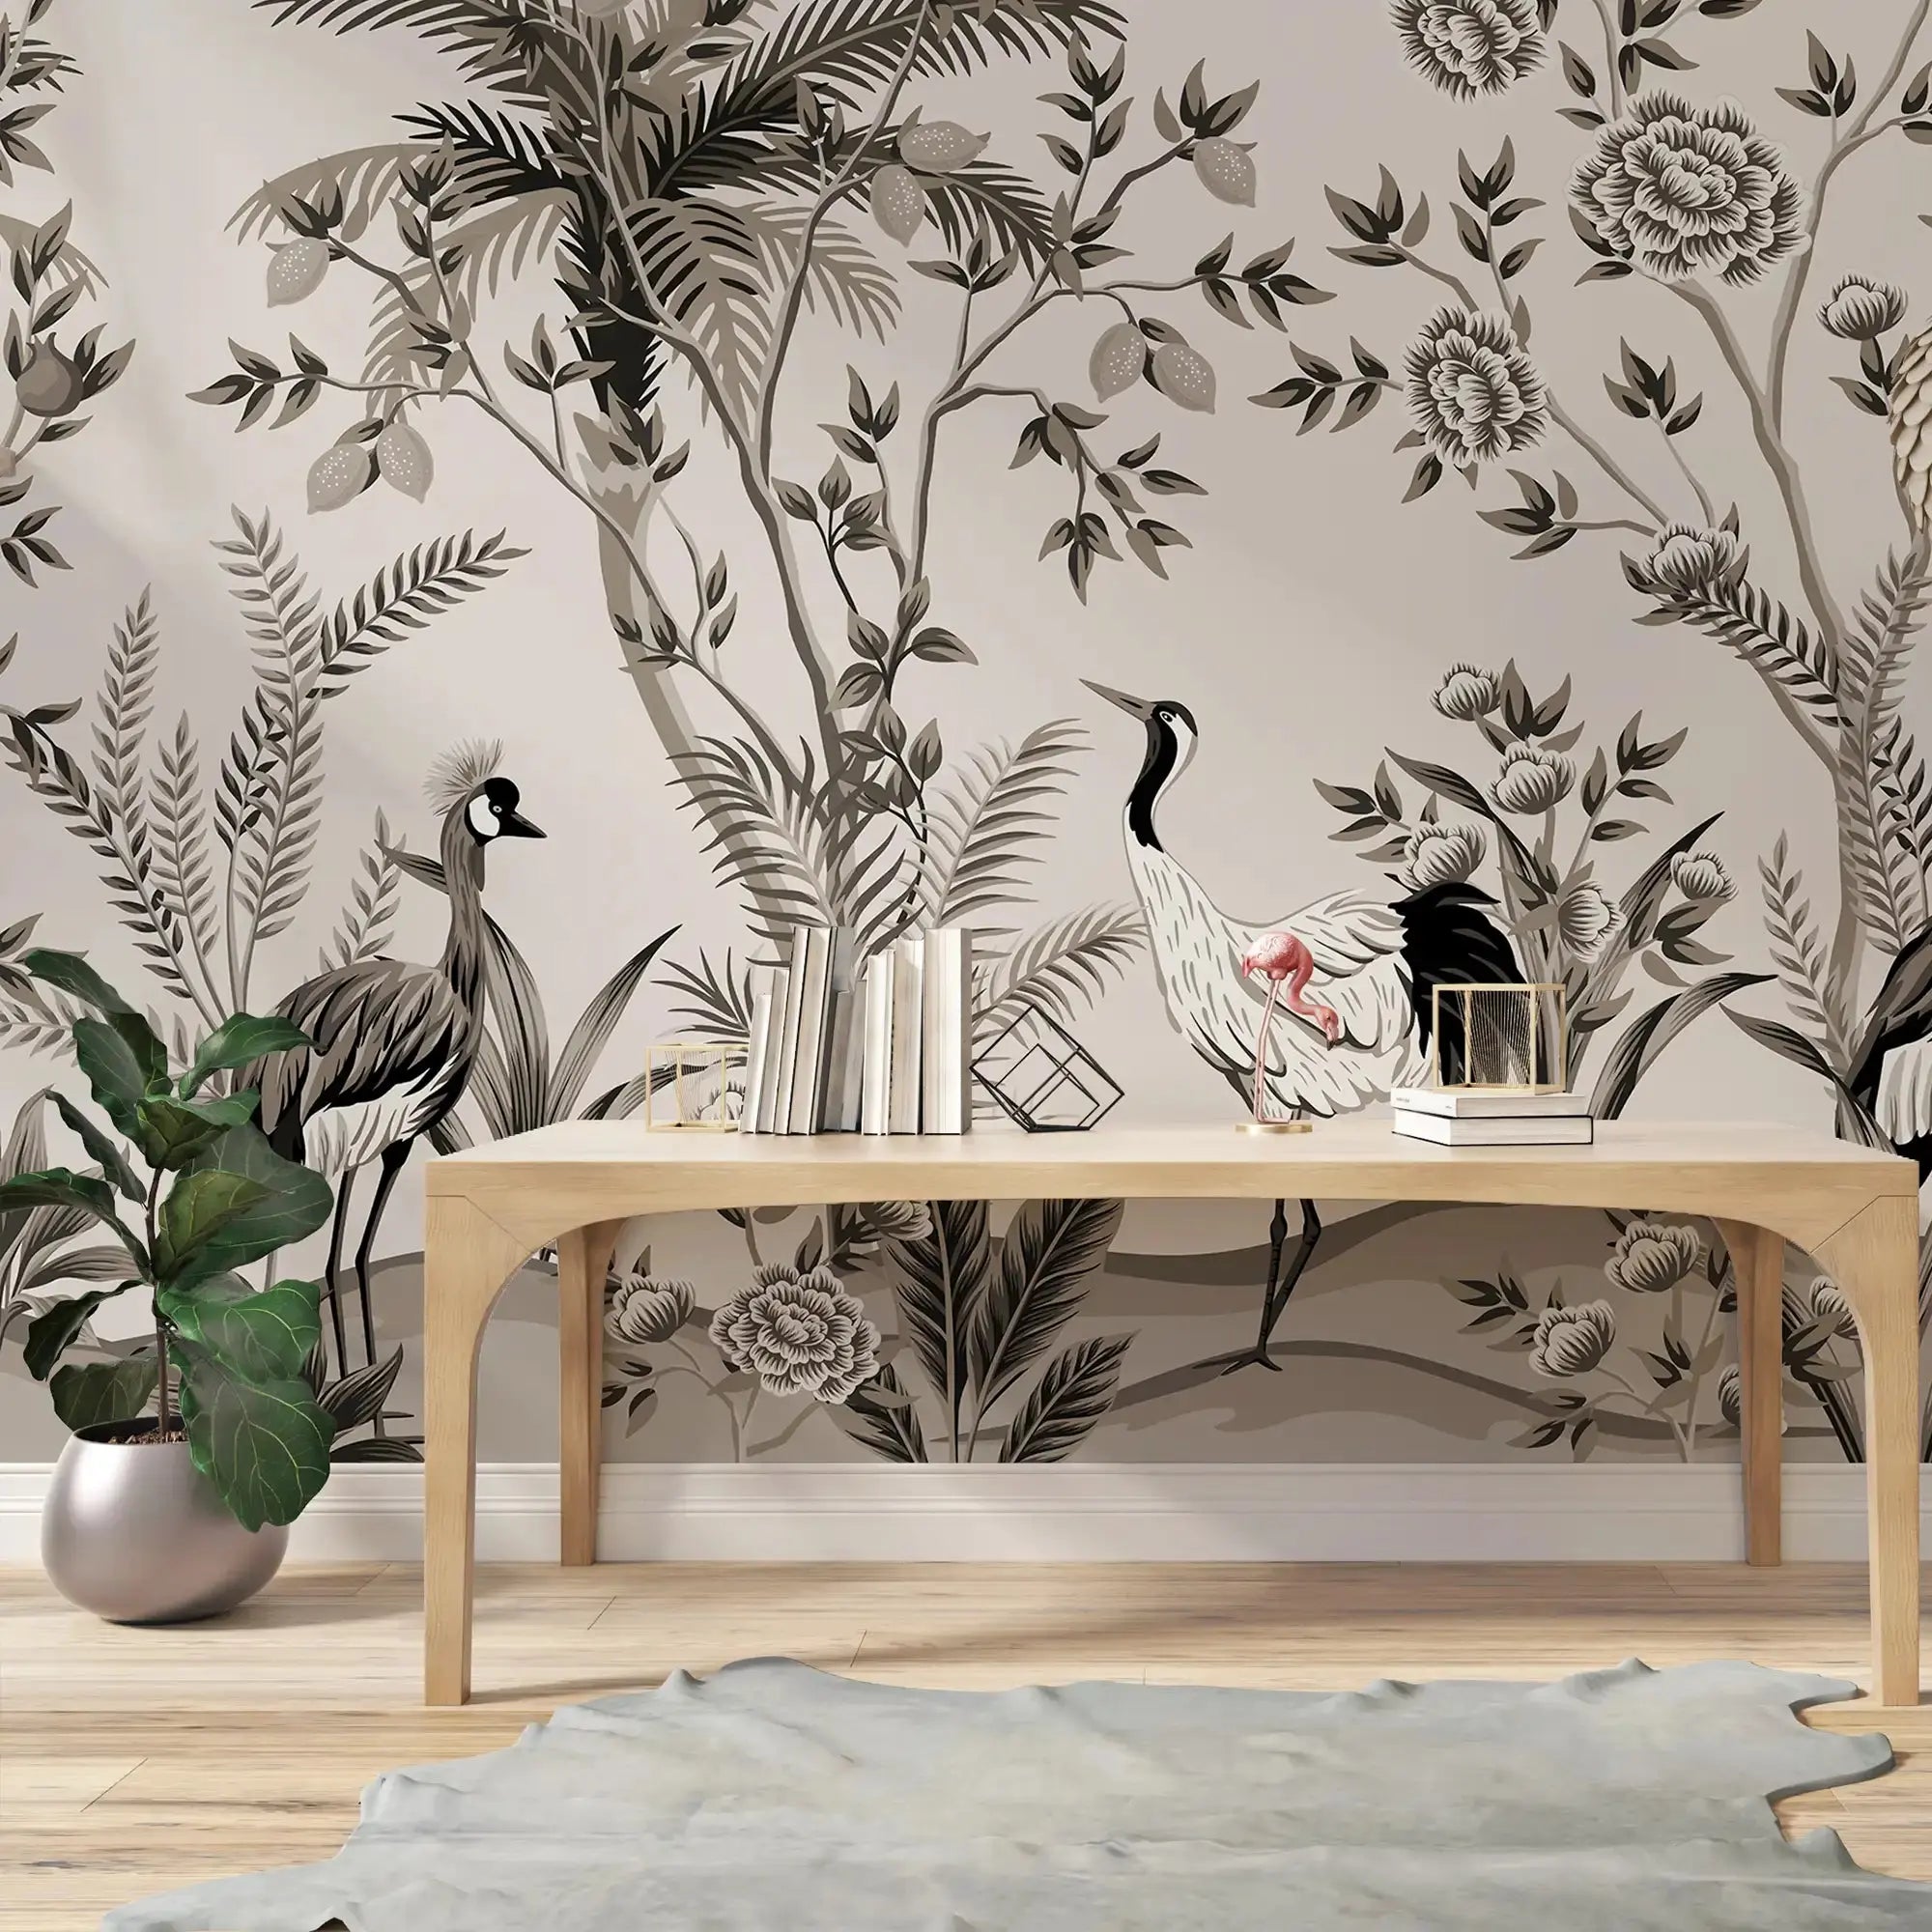 3107-F / Peelable Asian Wallpaper - Oriental Style with Cranes and Flowers - Easy Install Wall Mural - Artevella